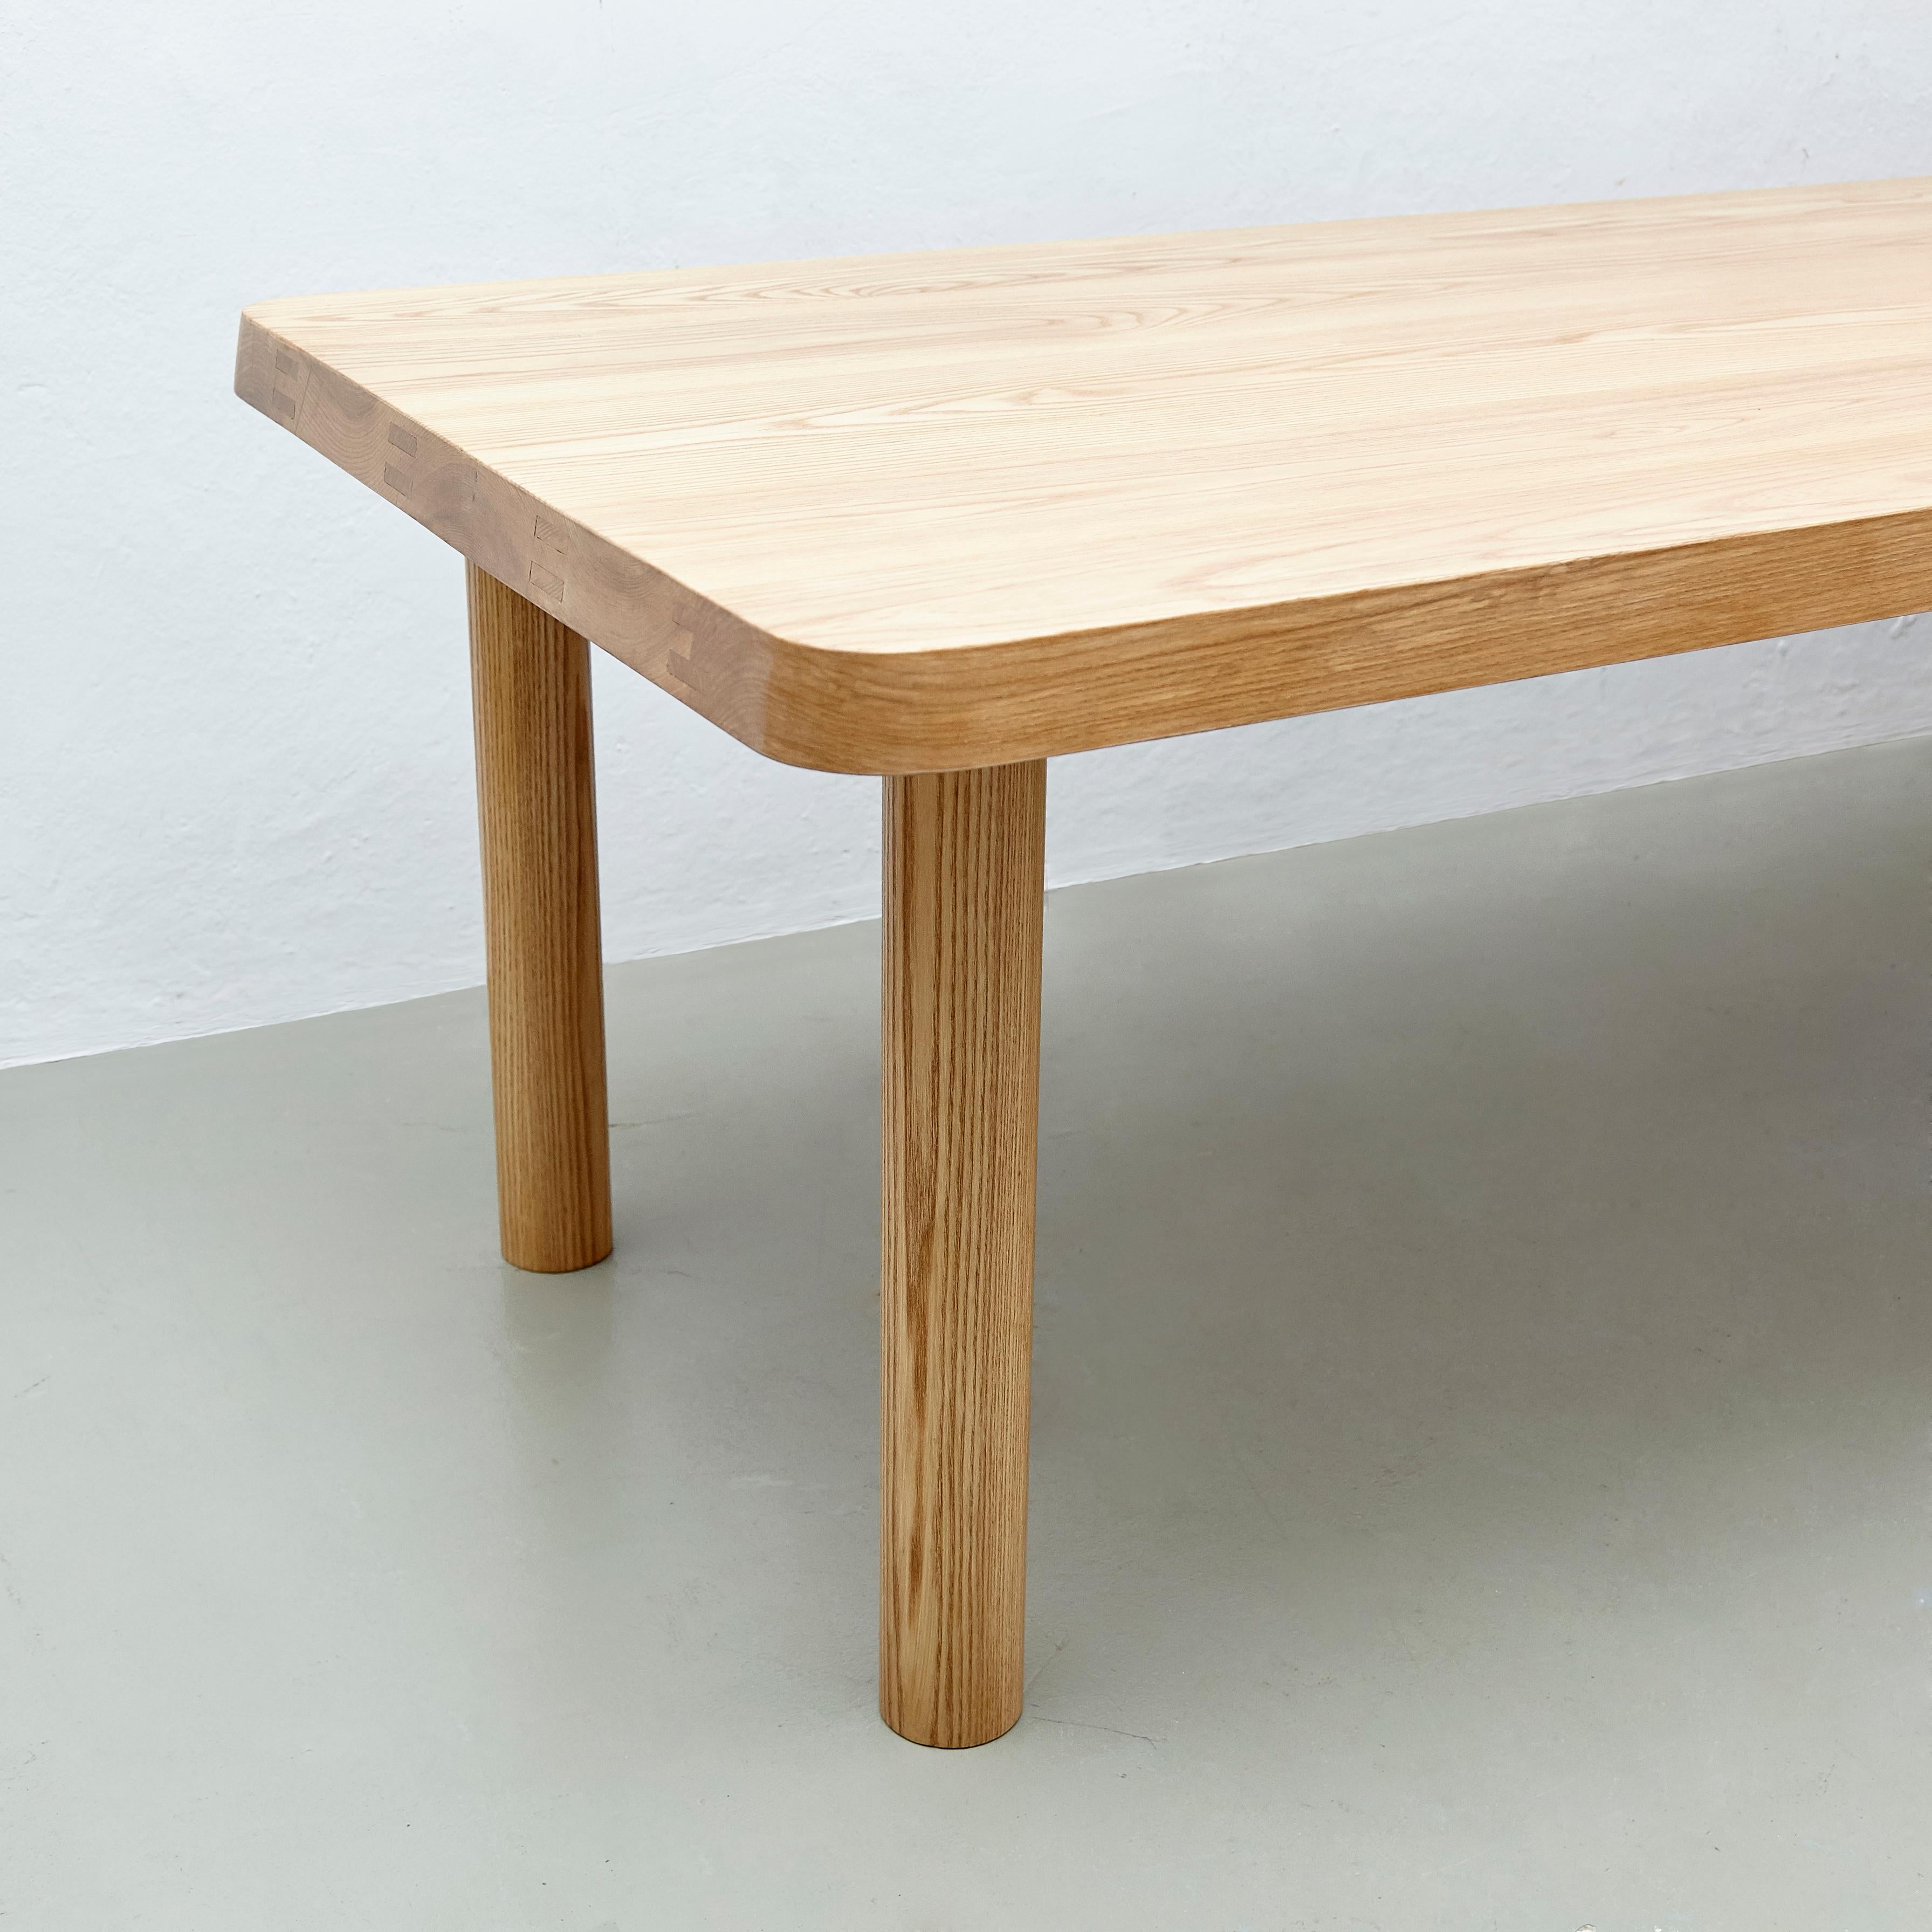 Spanish Dada Est. Contemporary Solid Ash Extra Large Dining Table